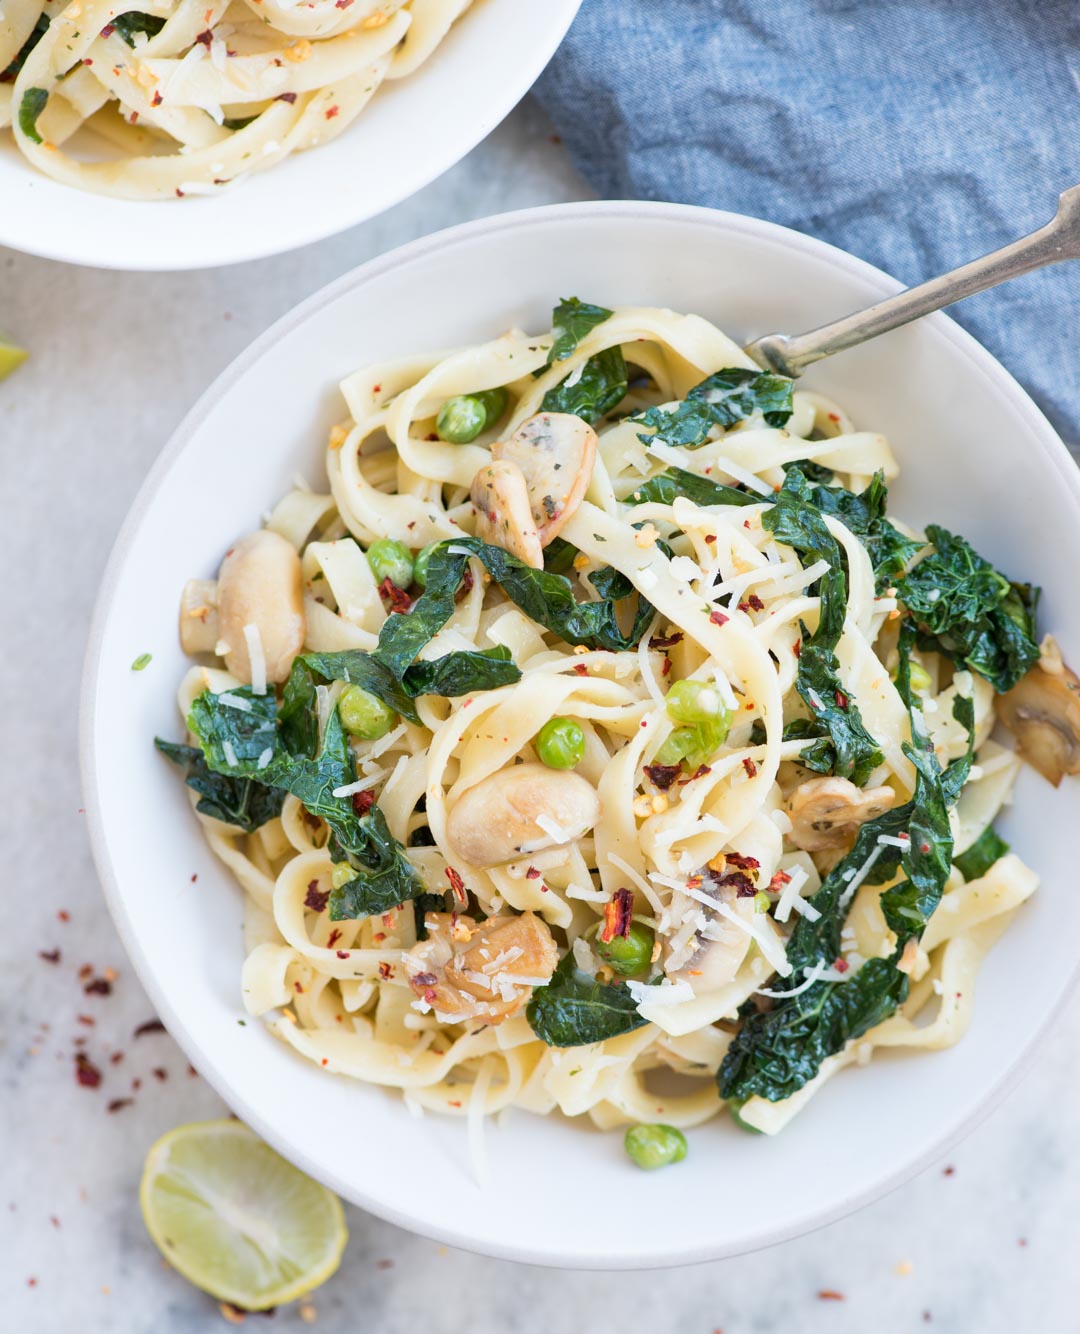 Lemon Garlic Kale Pasta. Pasta, Kale, Mushroom, peas tossed in a buttery lemon garlic sauce and topped with Parmesan. This one-pan delicious dinner is easy and quick to make